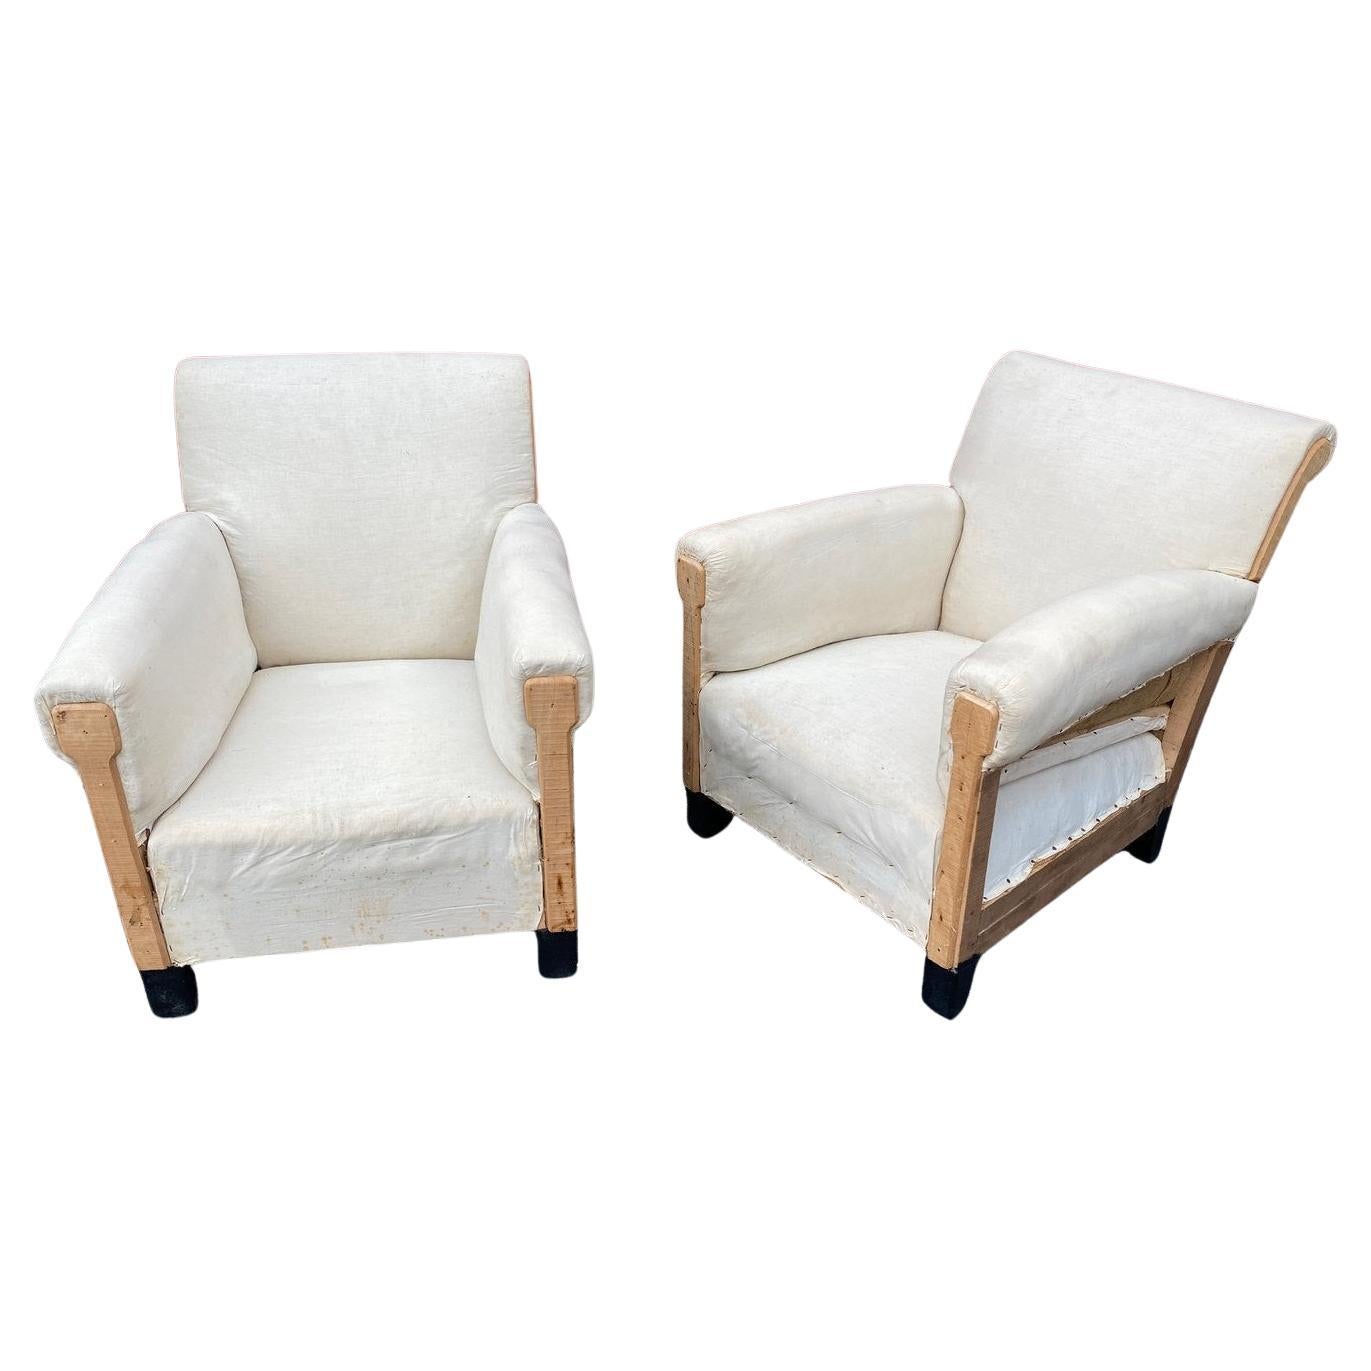 Pair of Small Scale 1950s French Mid Century Modern Club Chairs in Muslin For Sale